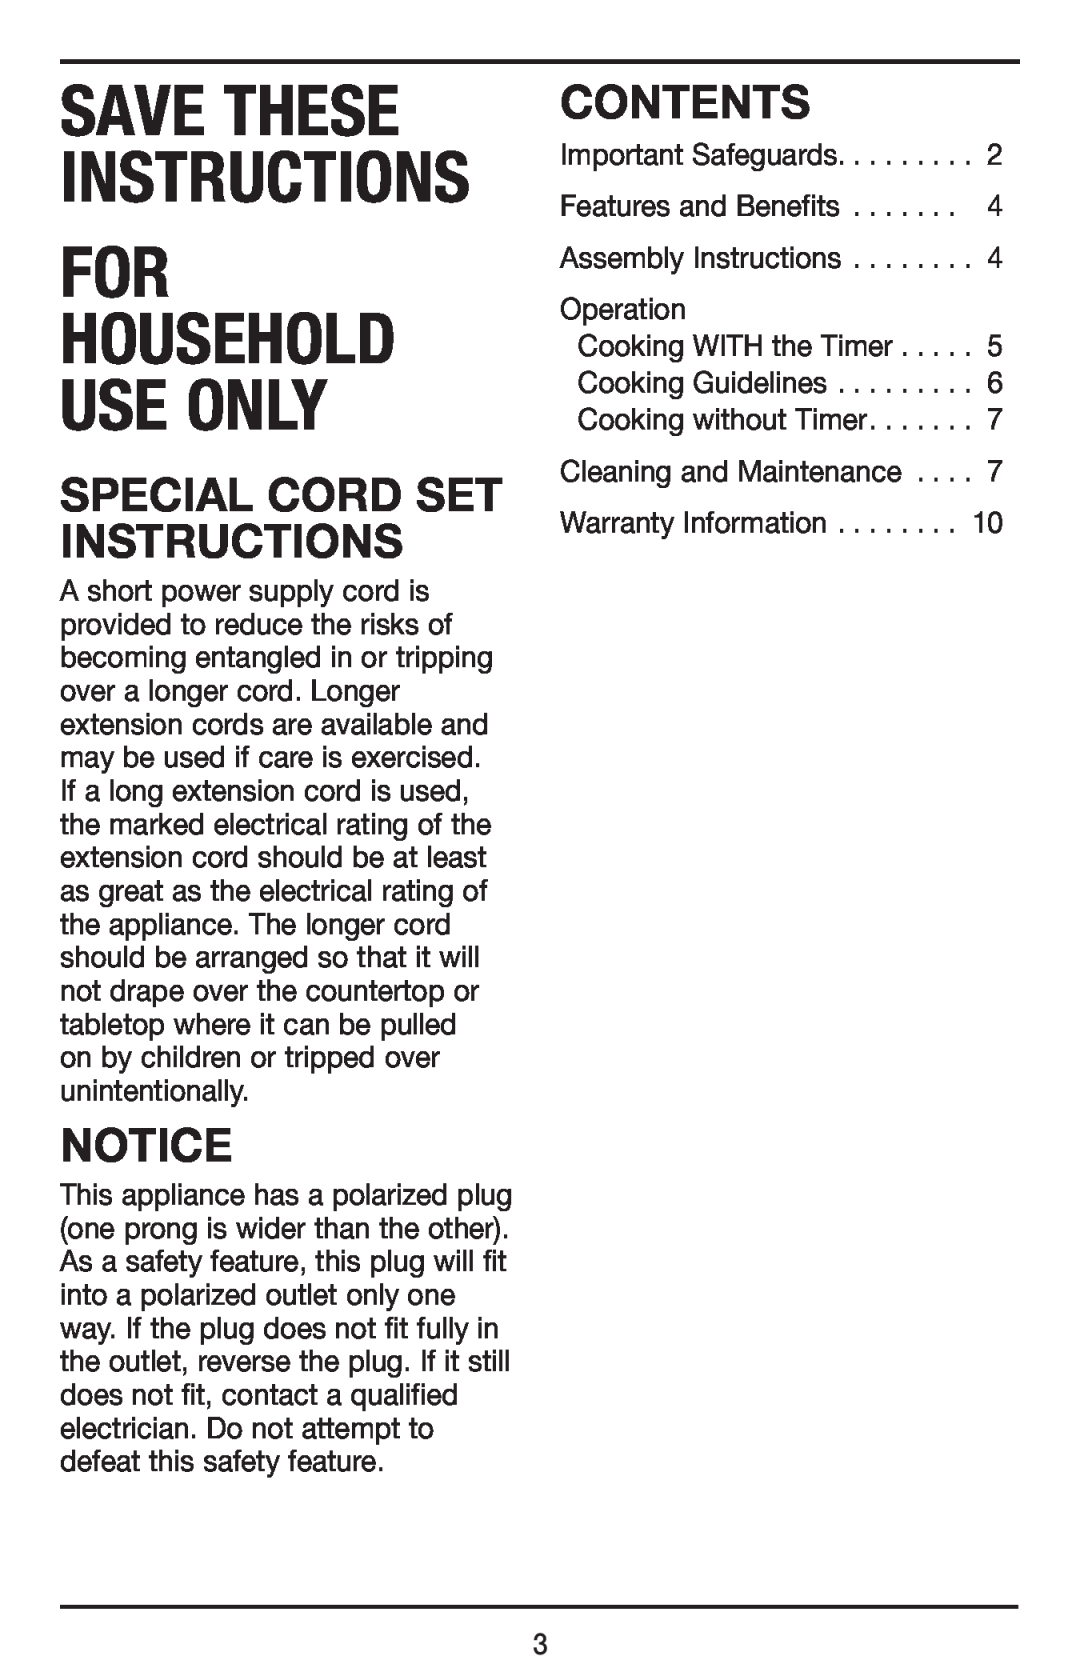 Cuisinart PSC-350 manual Save These Instructions, Notice, Contents, For Household Use Only, Special Cord Set Instructions 